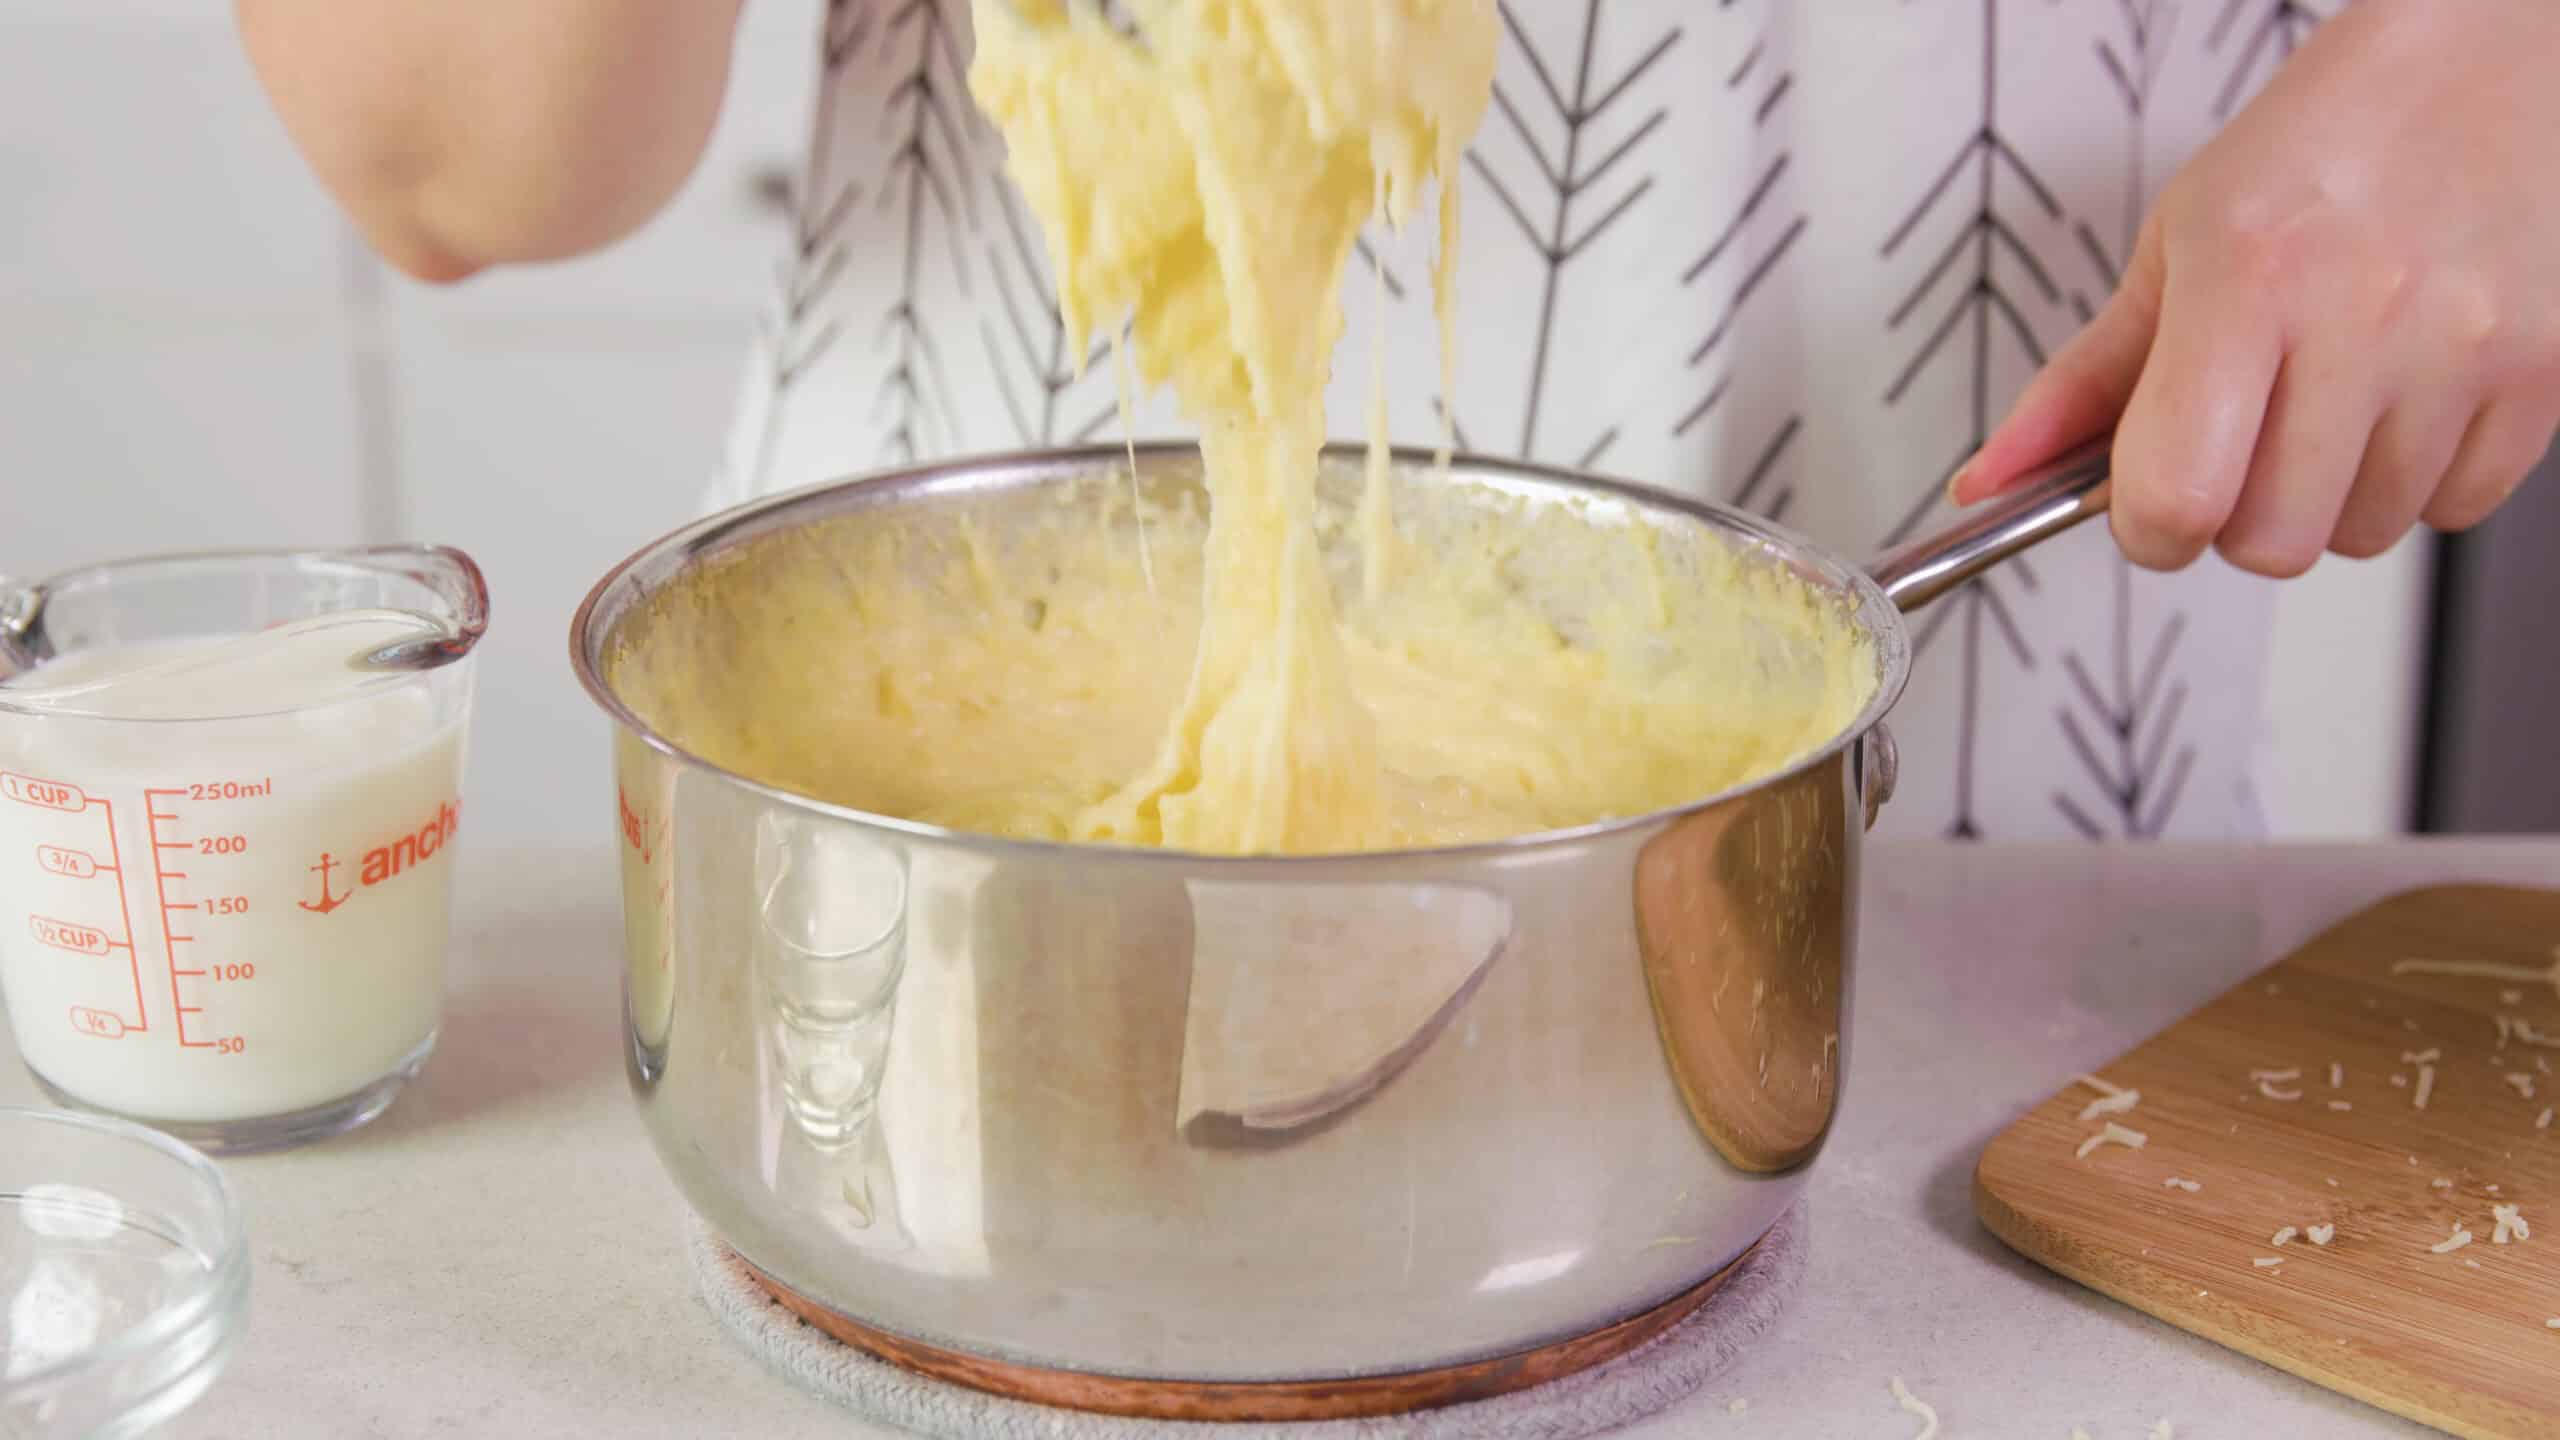 Side view of silver pot on countertop showing the texture and consistency of the polenta after mixing in the cheese with the other ingredients.